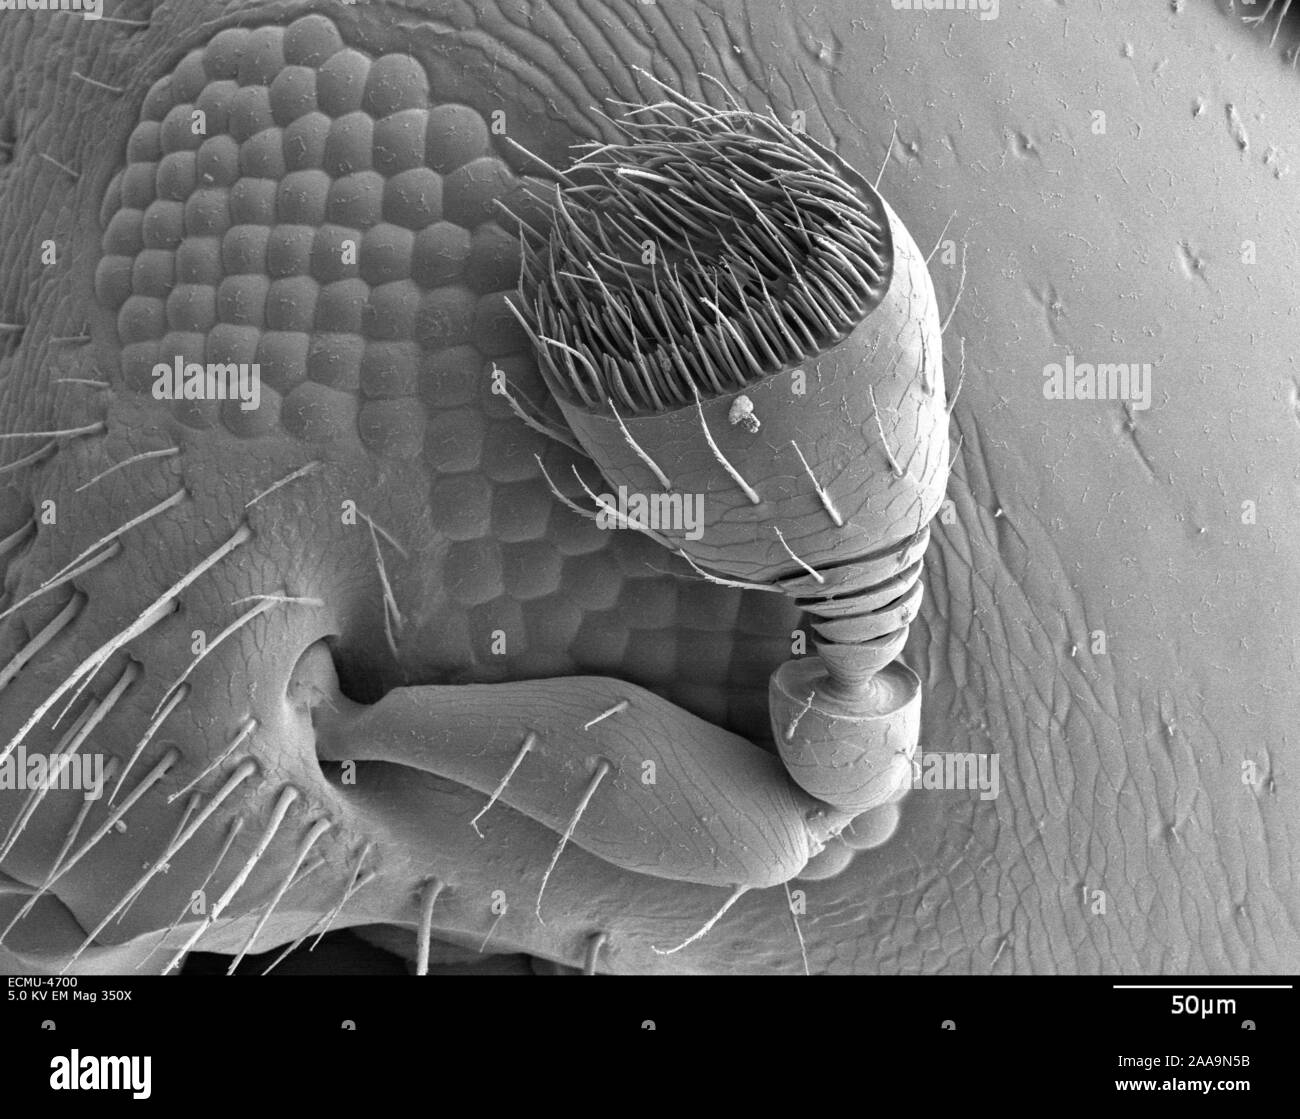 A scanning electron microscope image of a redbay ambrosia beetle antenna. Stock Photo